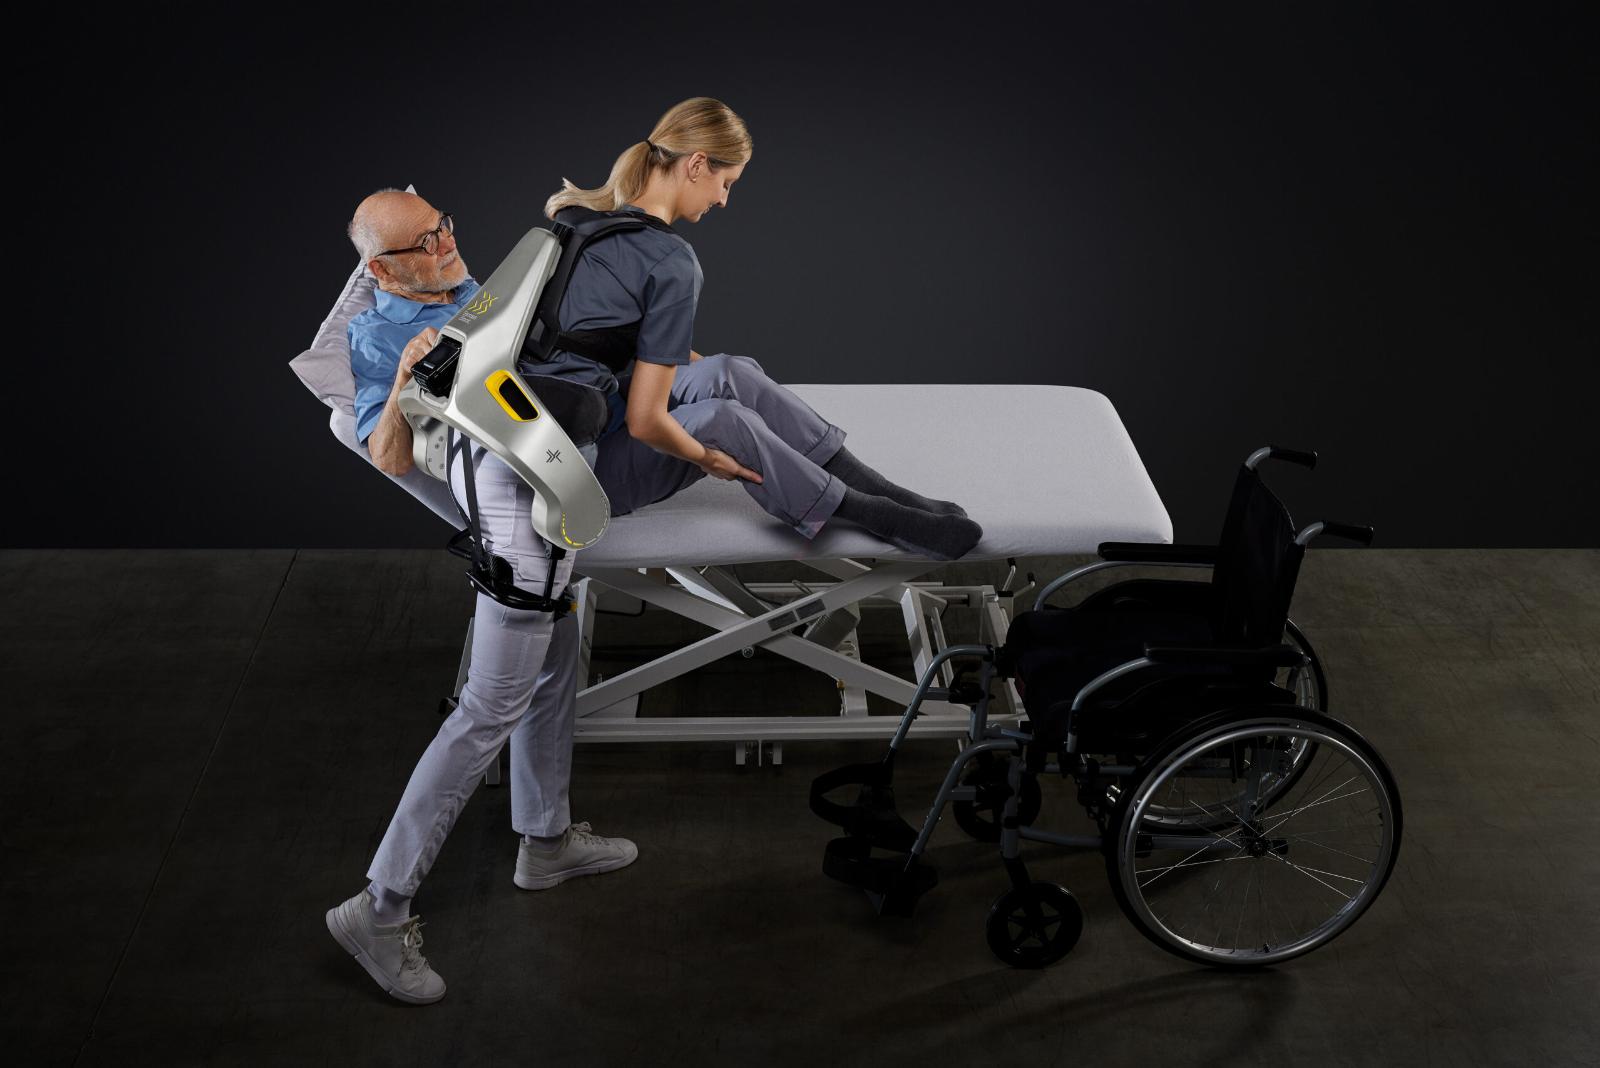 German Bionic targets healthcare workers with new exosuit